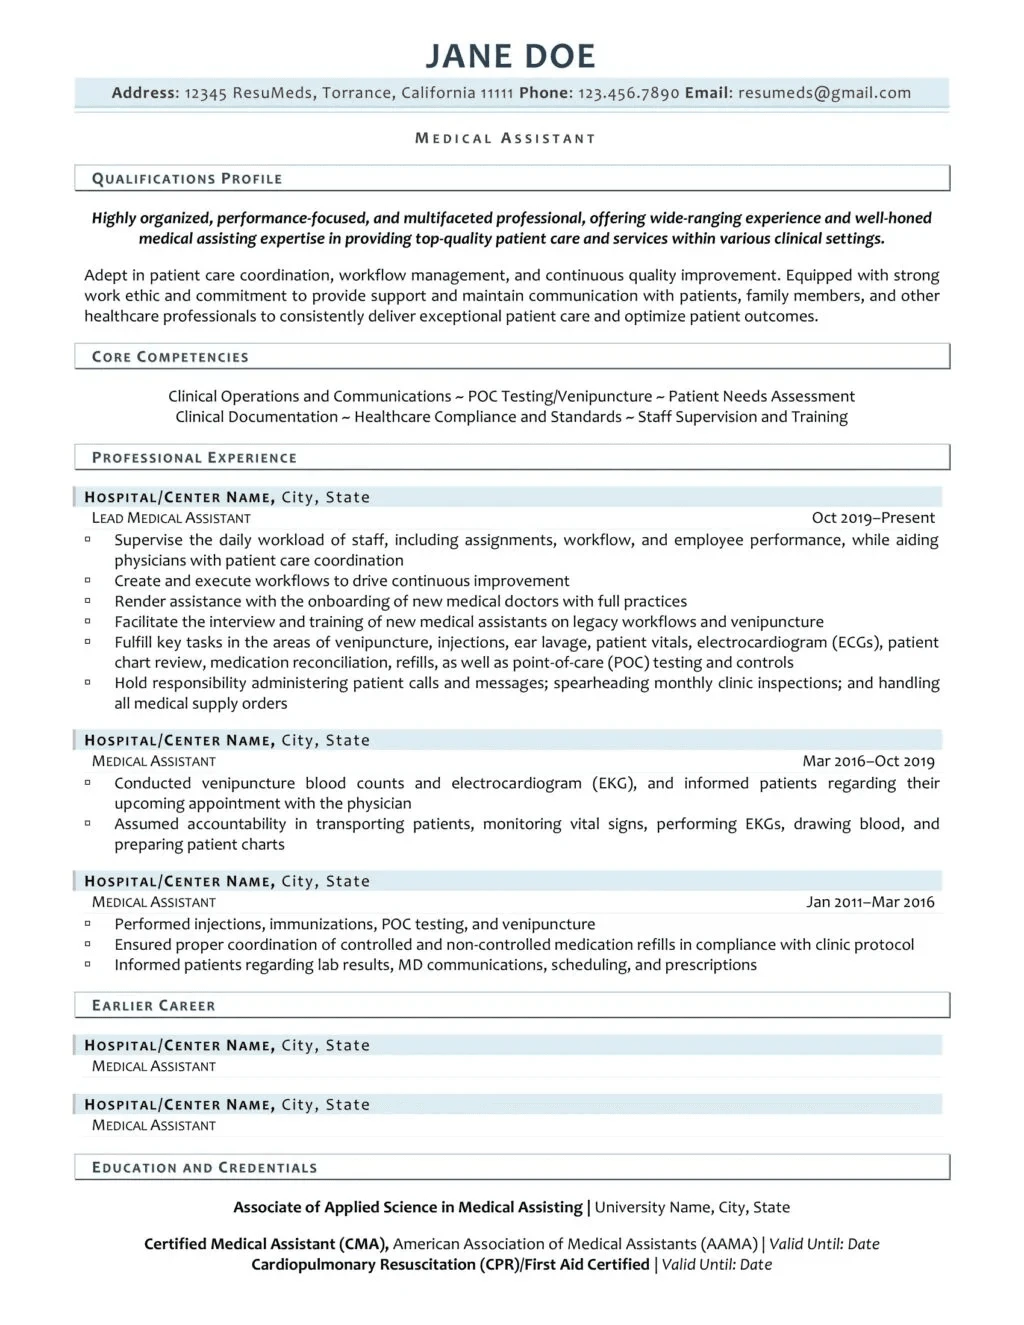 medical assistant resume example